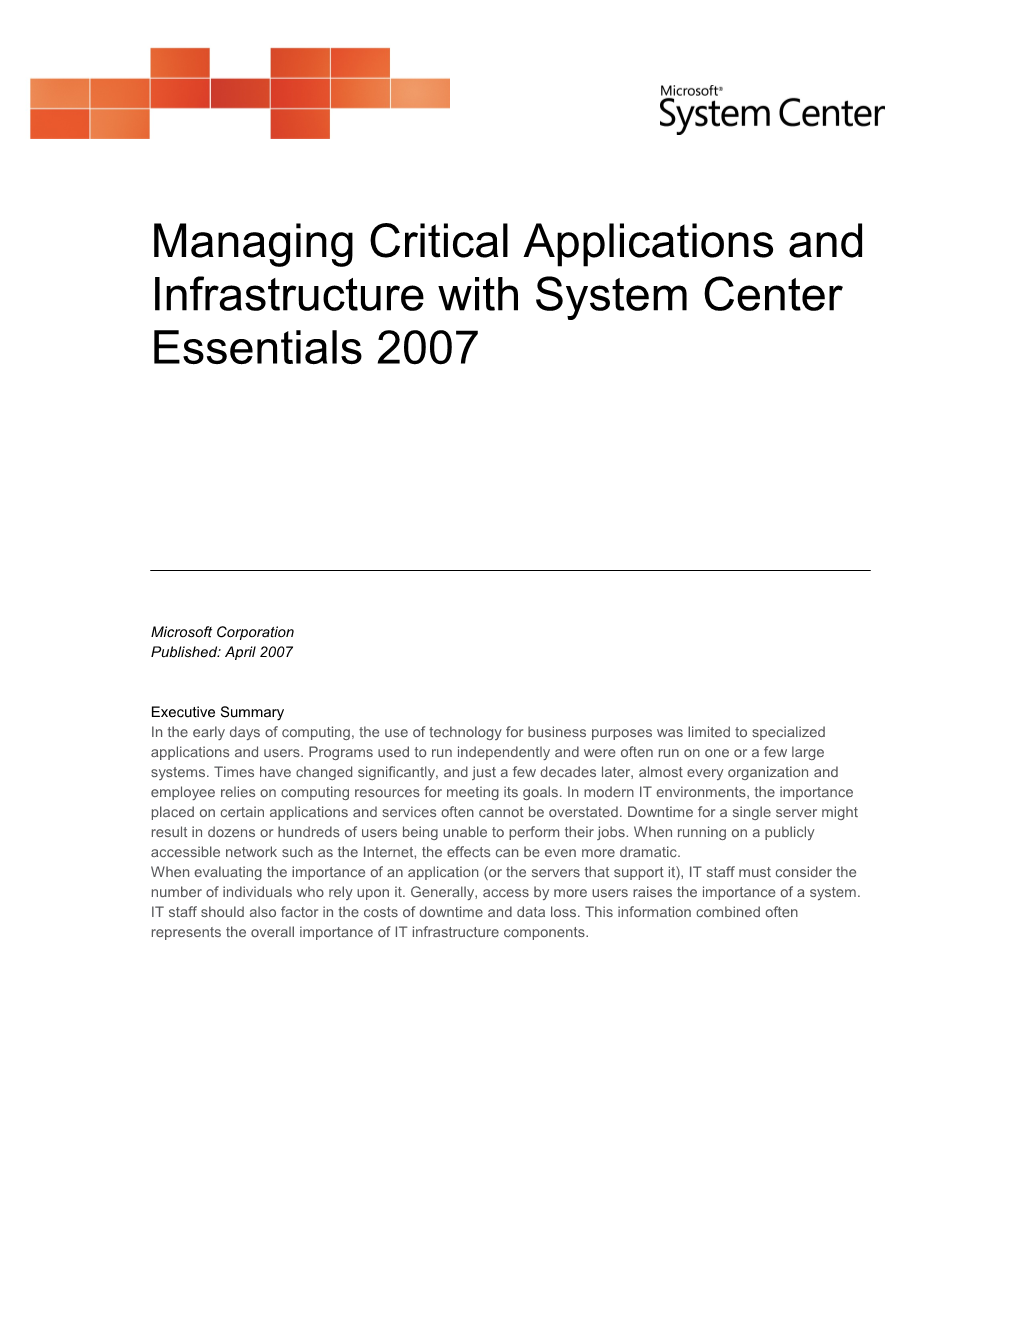 Managing Critical Applications and Infrastructure with System Center Essentials 2007